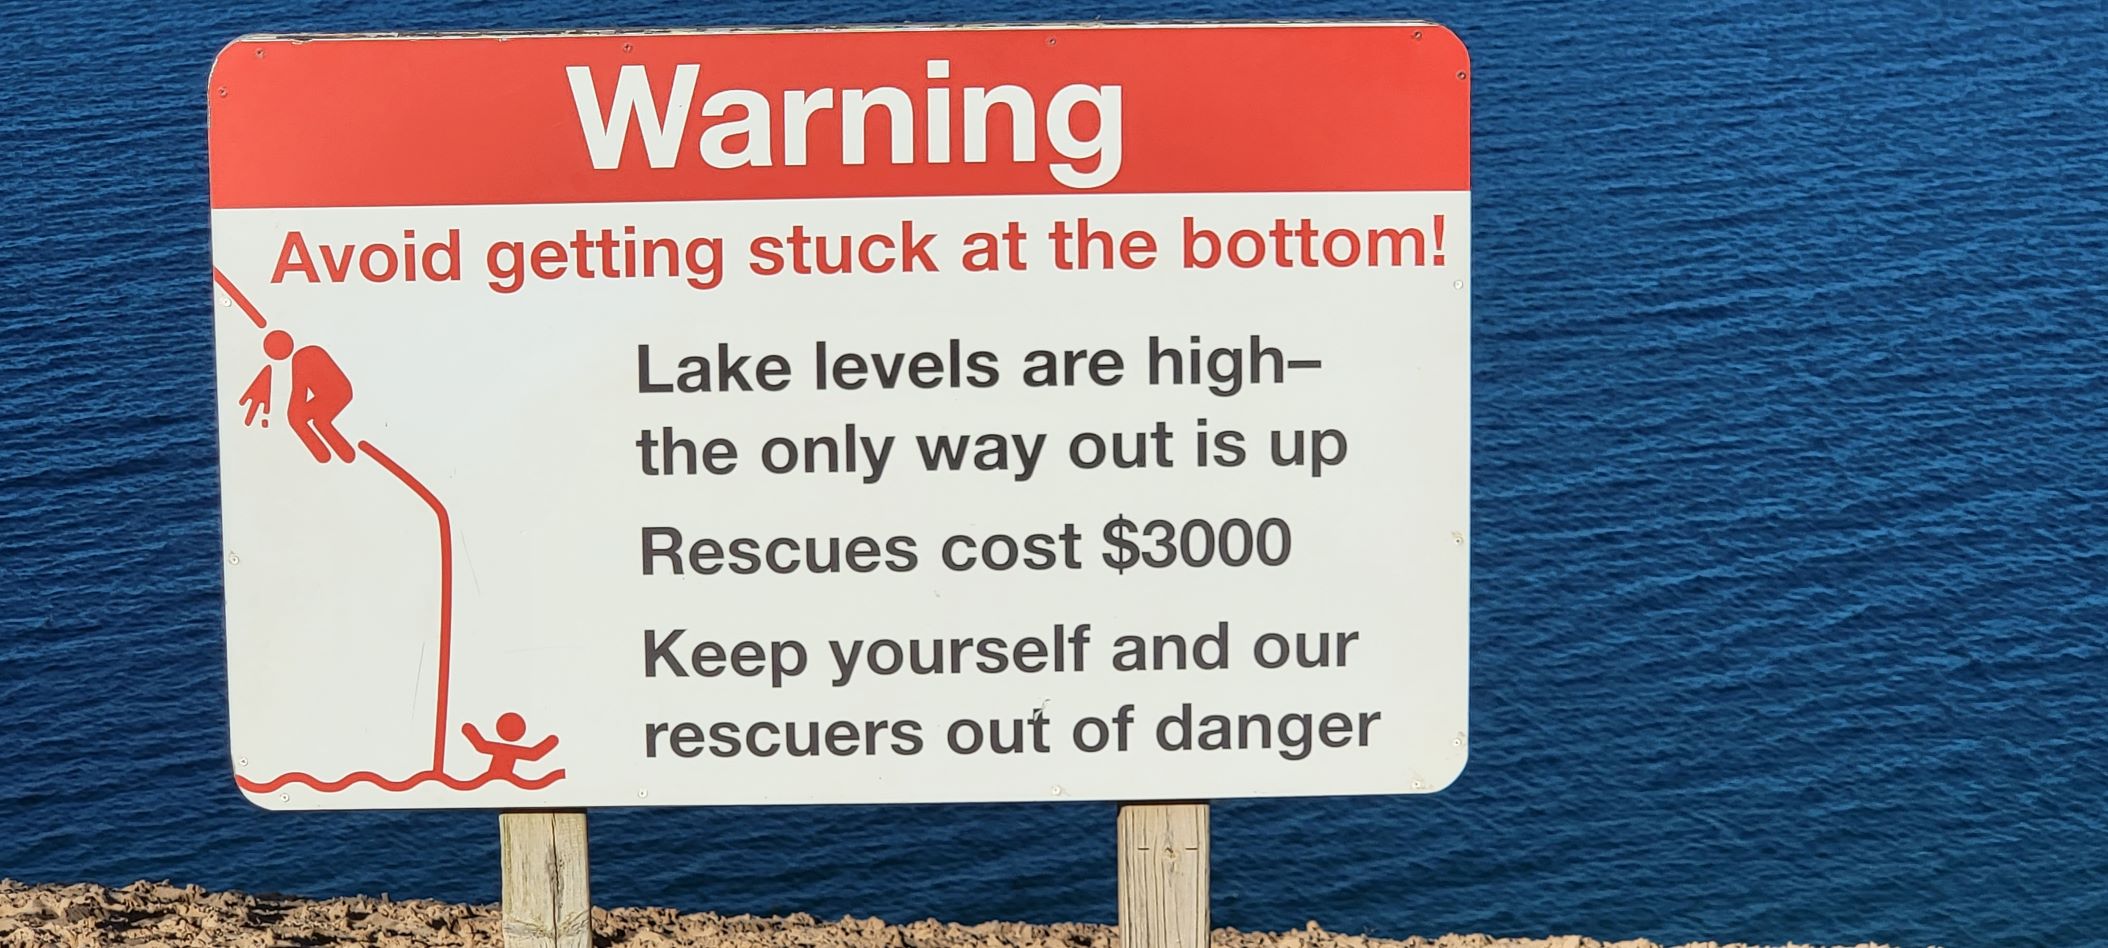 Avoid Being Stuck at the Bottom